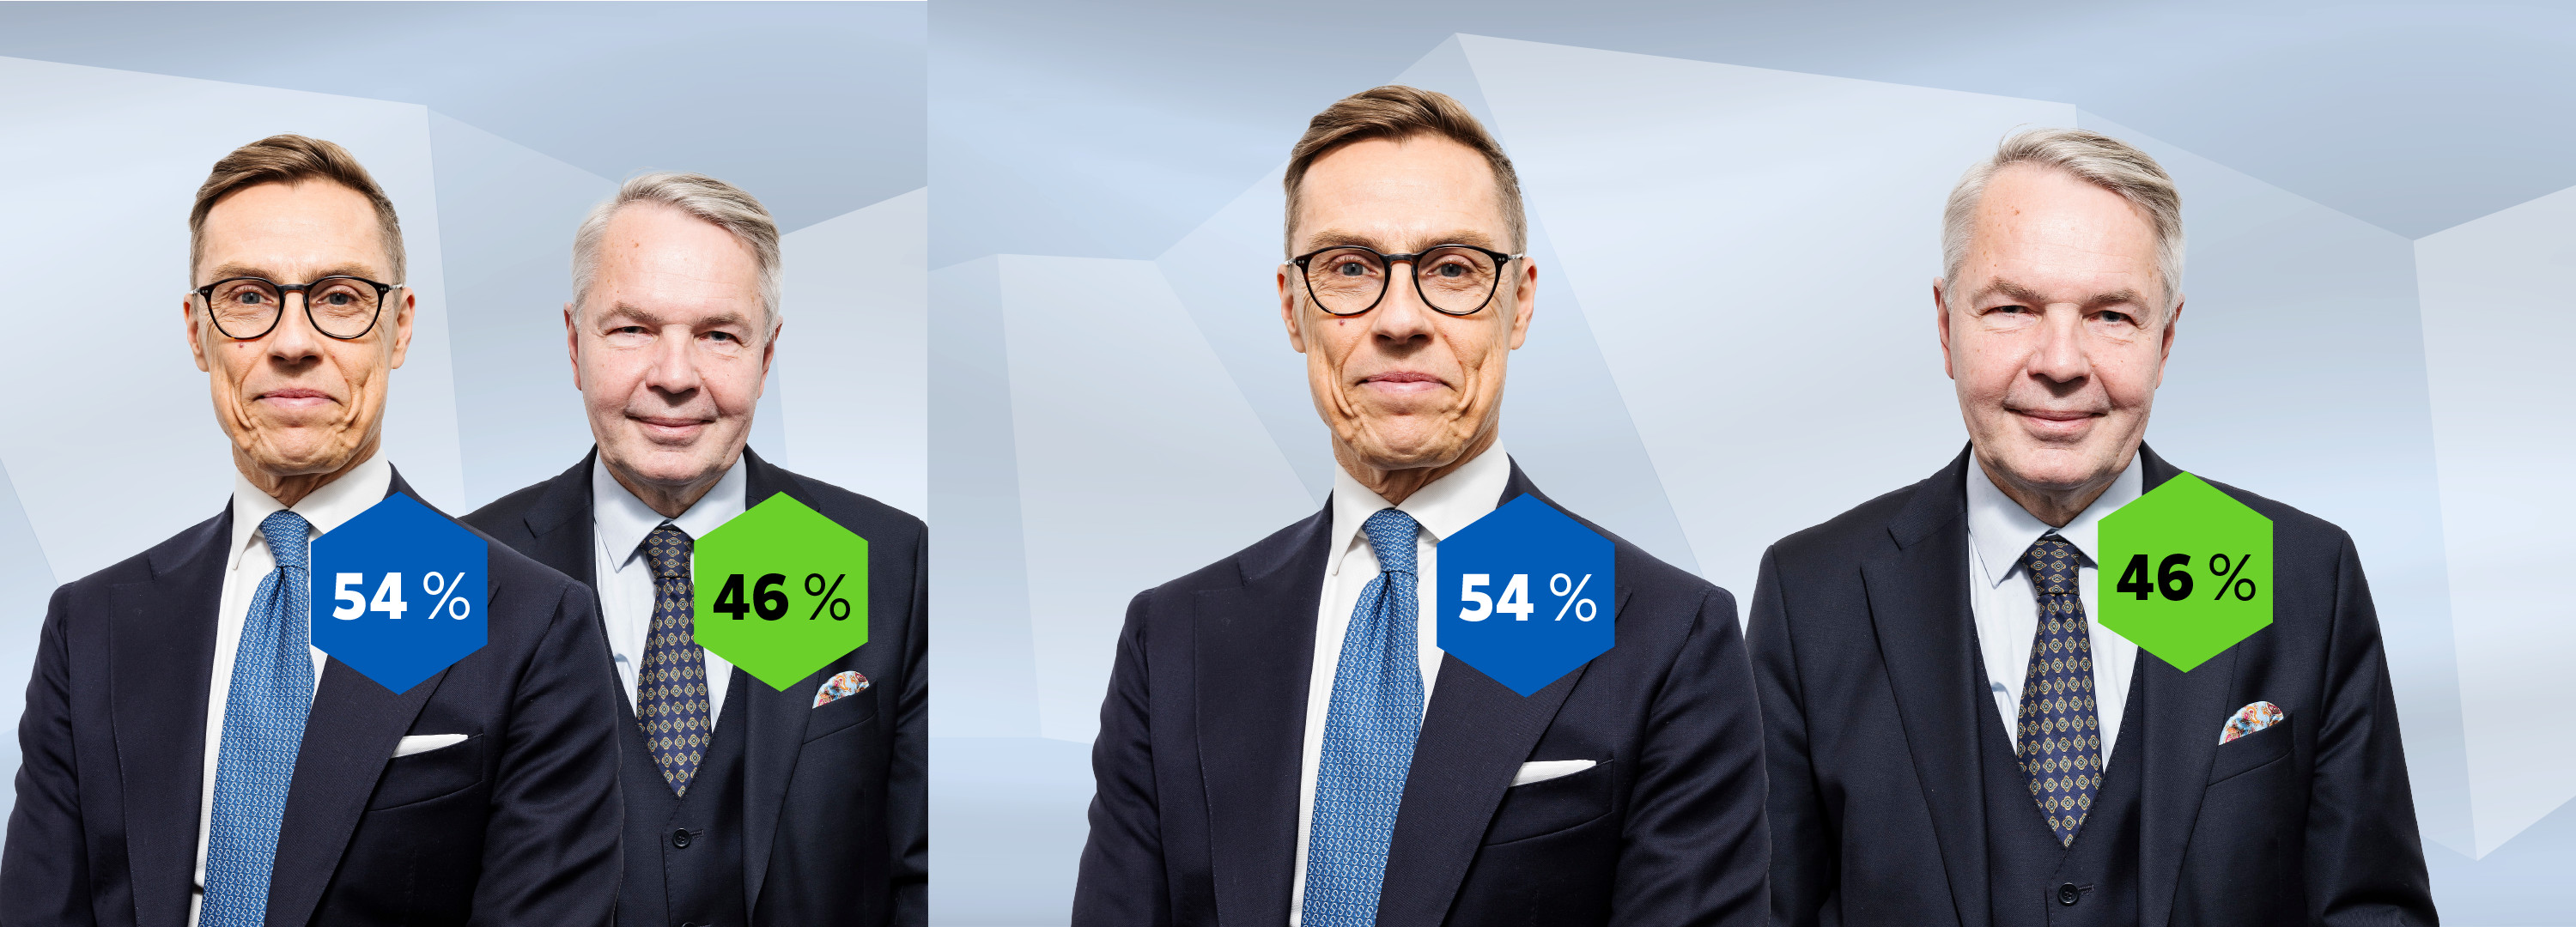 Yle's election poll: The gap is narrowing, undecided voters will play a key role in Sunday's round